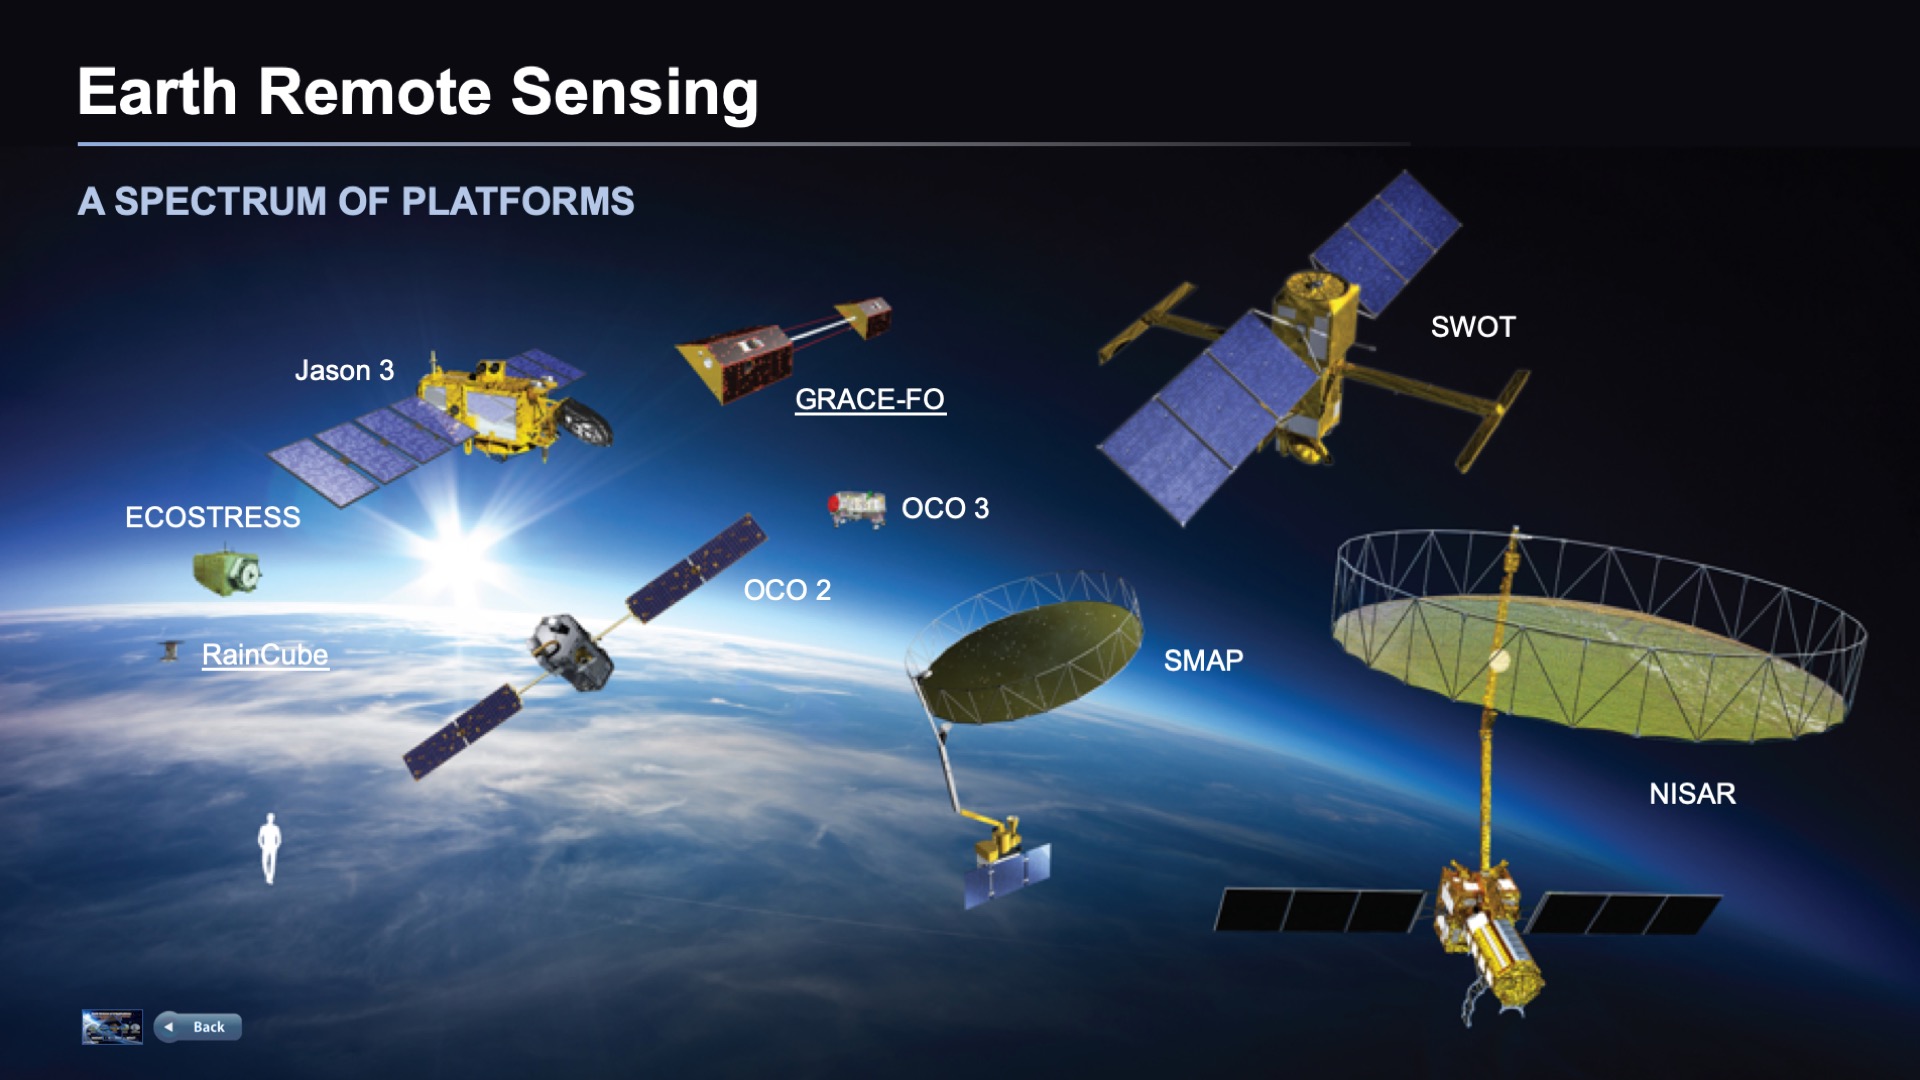 presentation slide showing graphics of Earth remote sensing missions